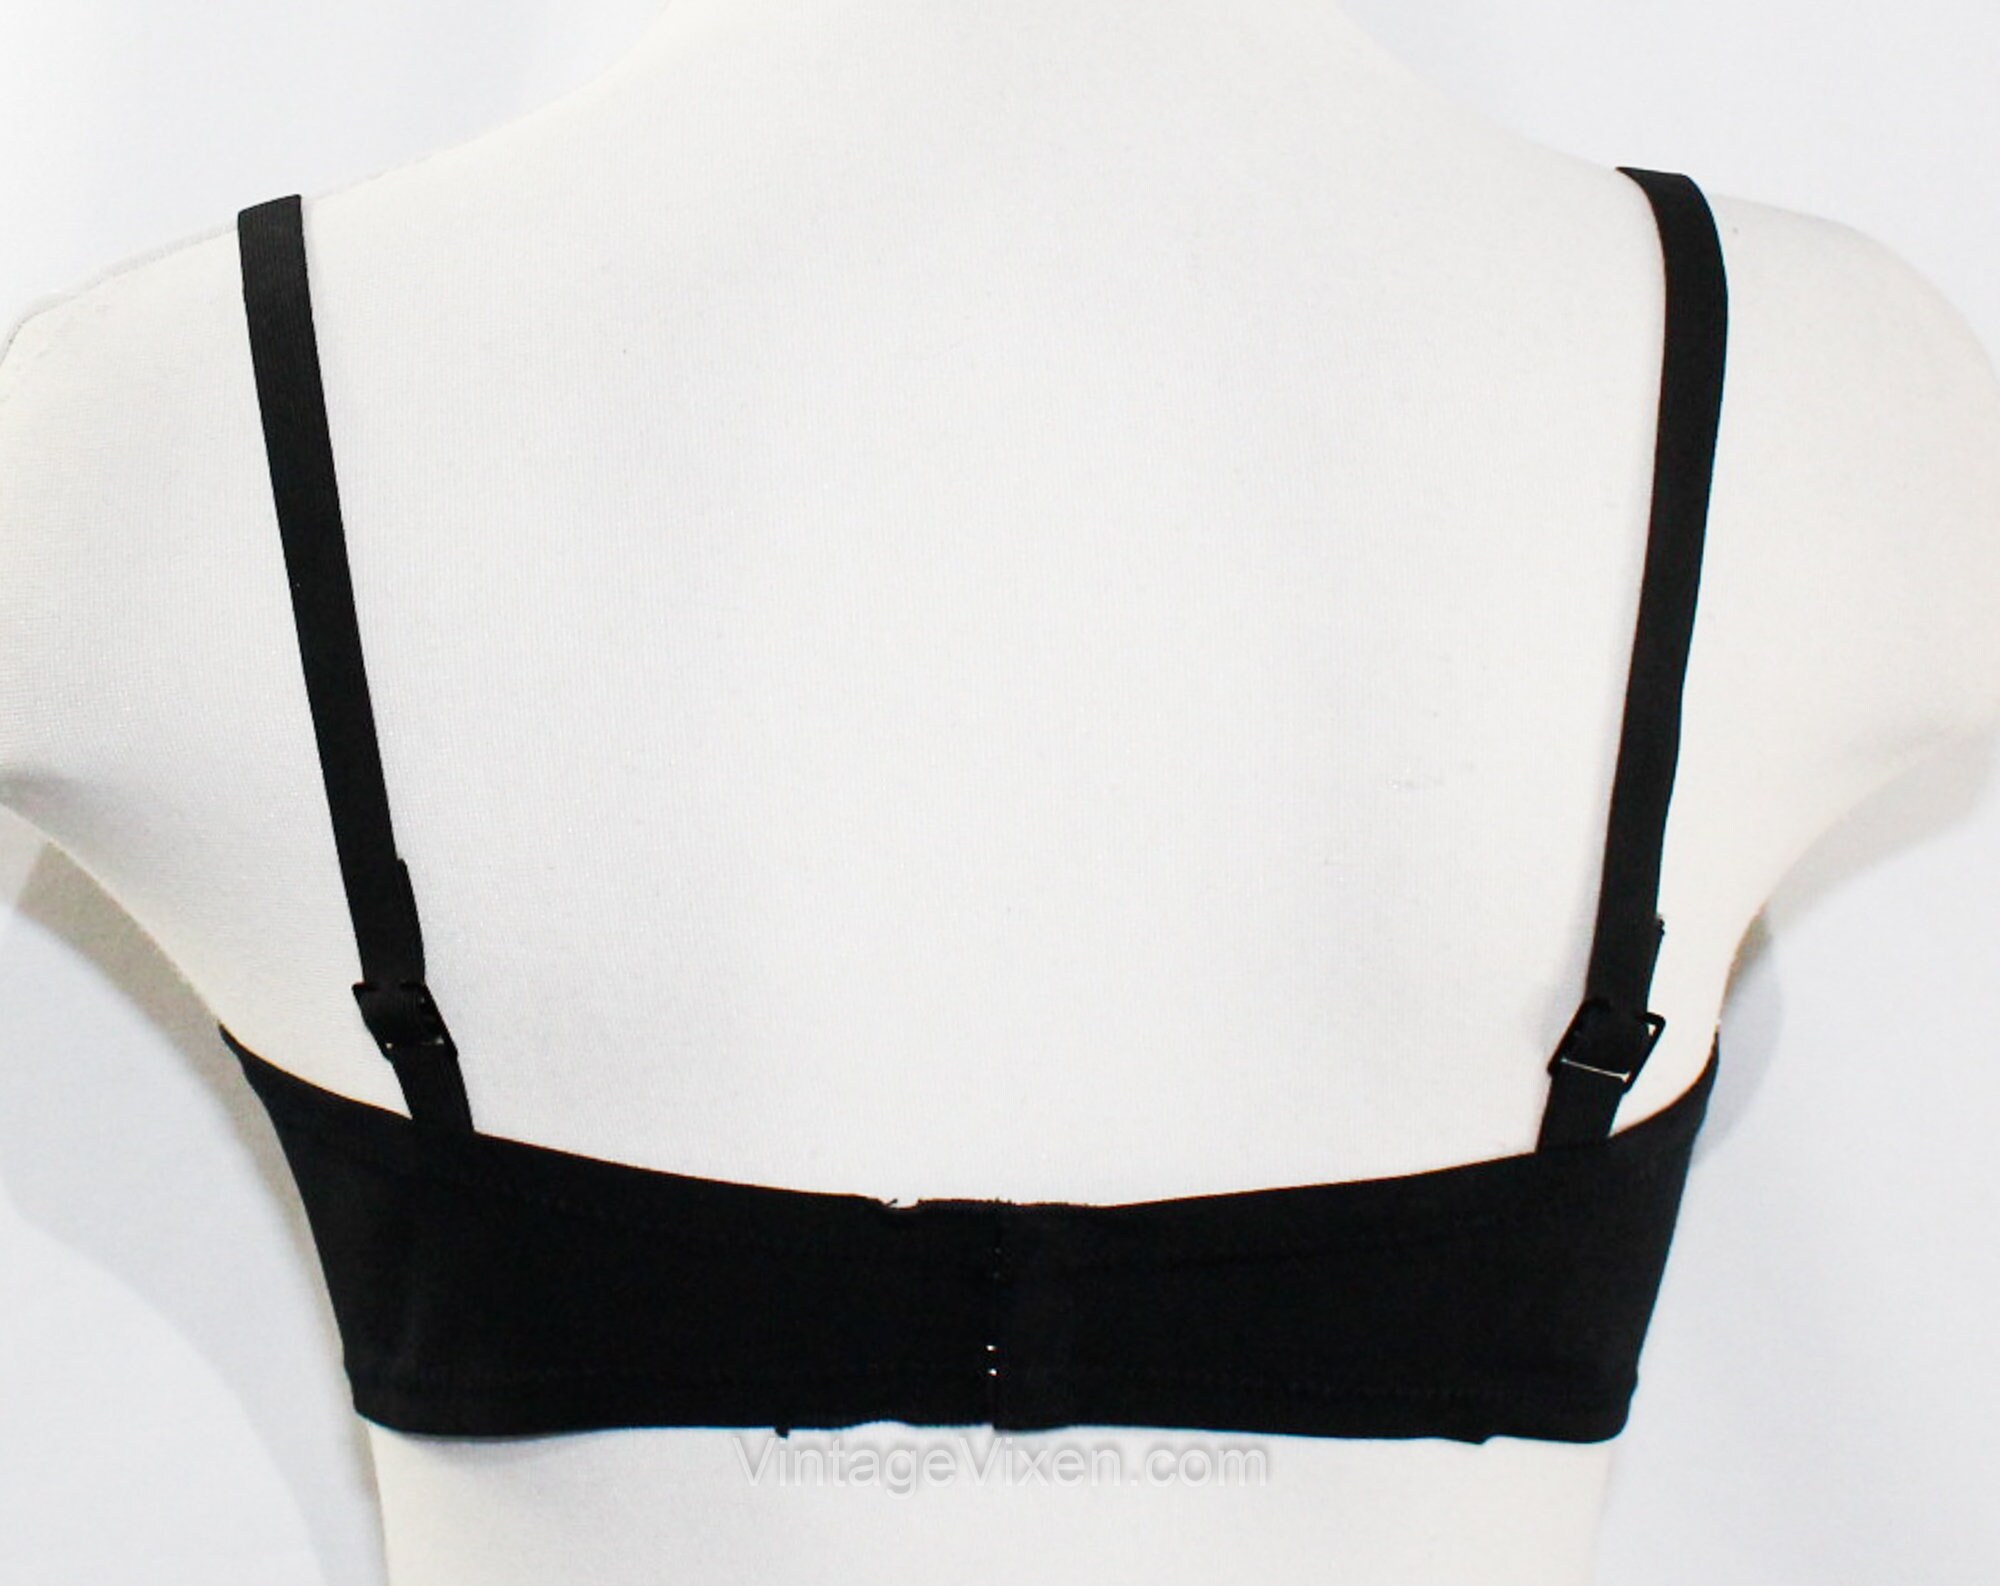 1960s Black Bra Bond Girl Sexy Pin-up 36A Demi Cup Plunge Underwire Bra  1950s 60s Exquisite Form Cotton Lingerie NOS Size 36 A -  Ireland